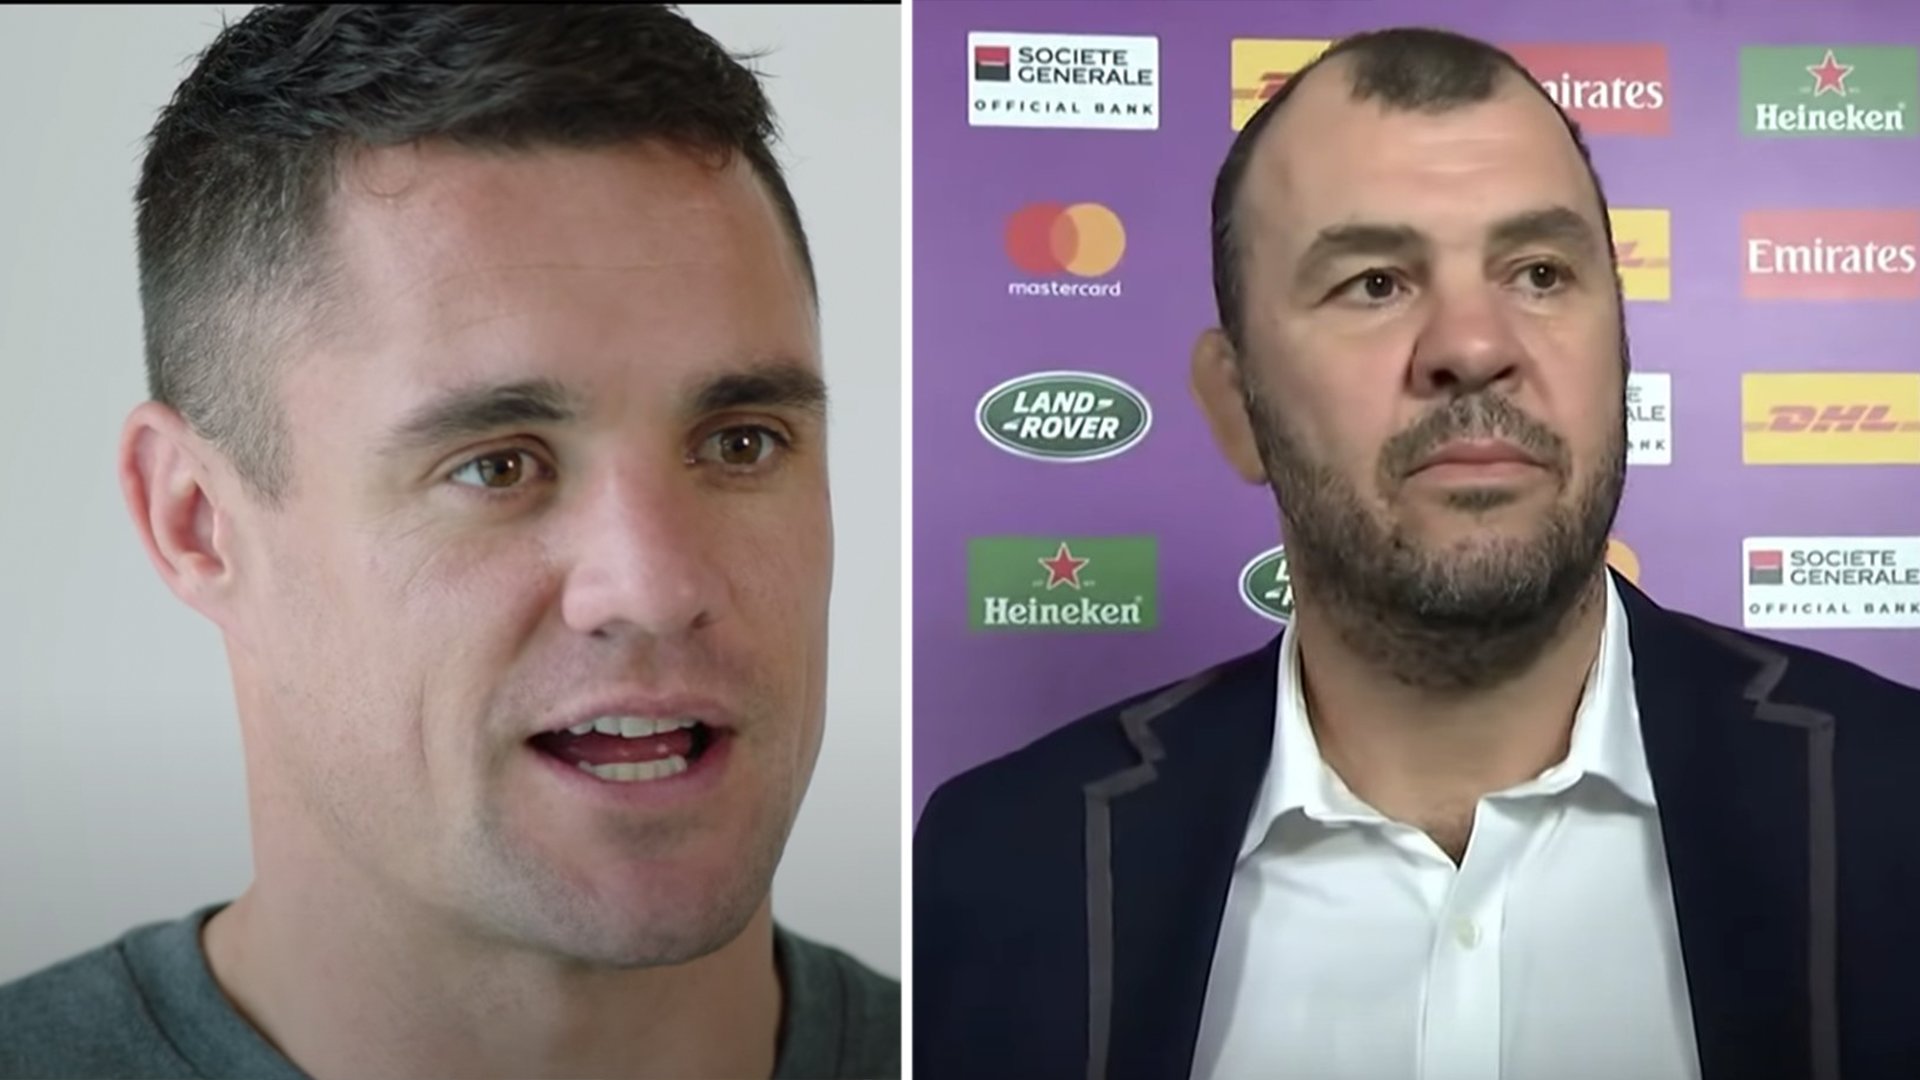 Dan Carter has just roasted Michael Cheika and Australia's win record to his face on video